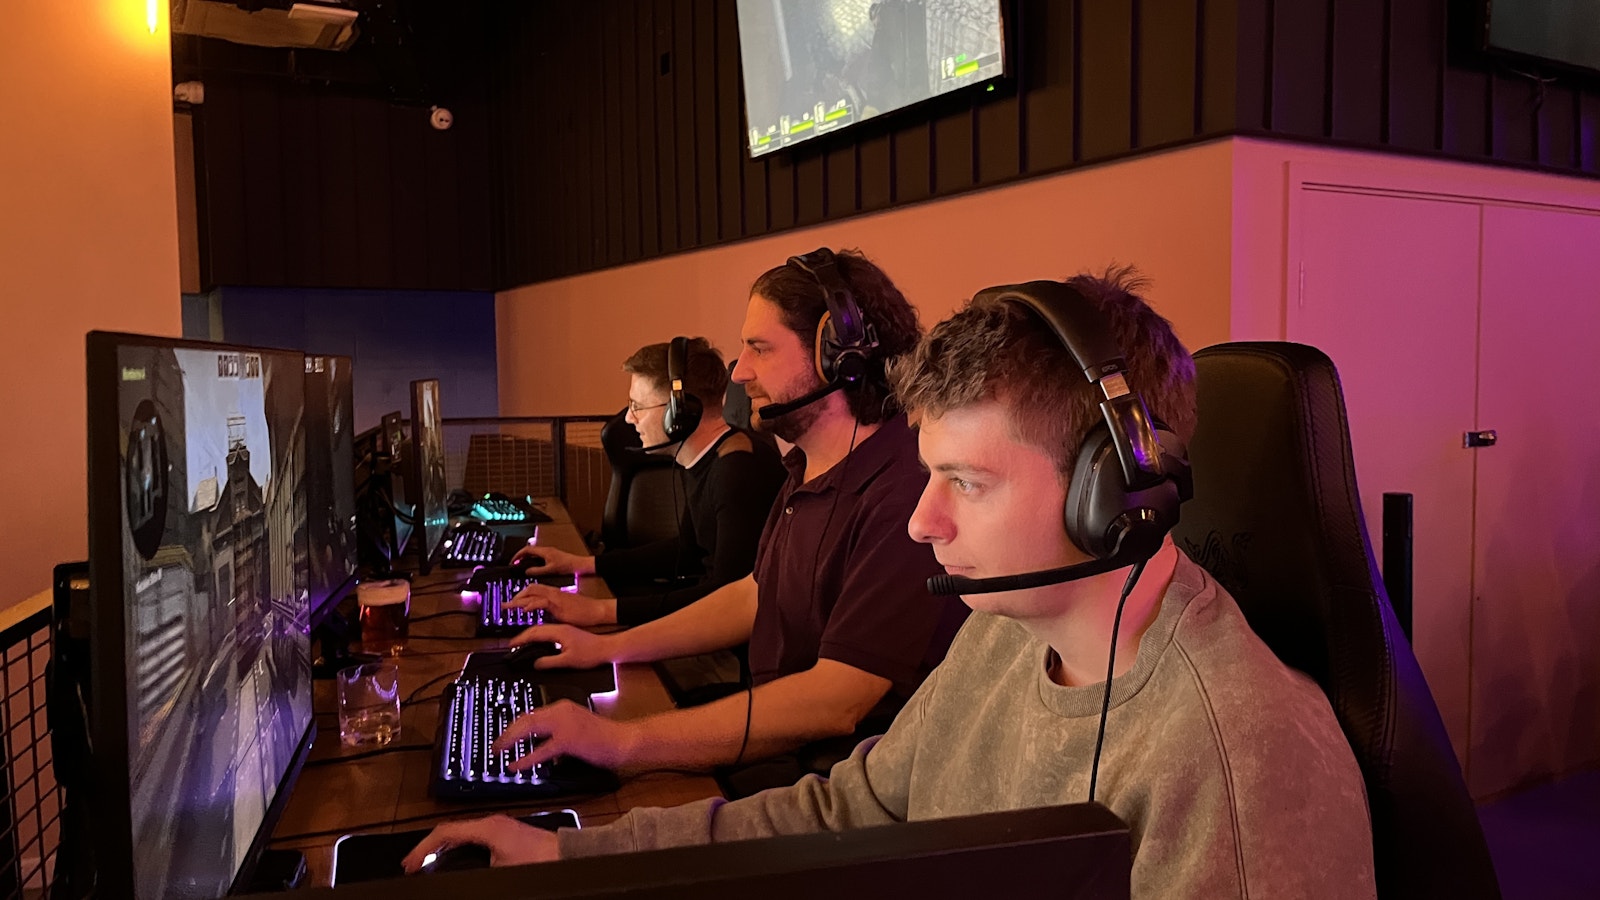 A team of Superscript employees taking part in the esports tournament